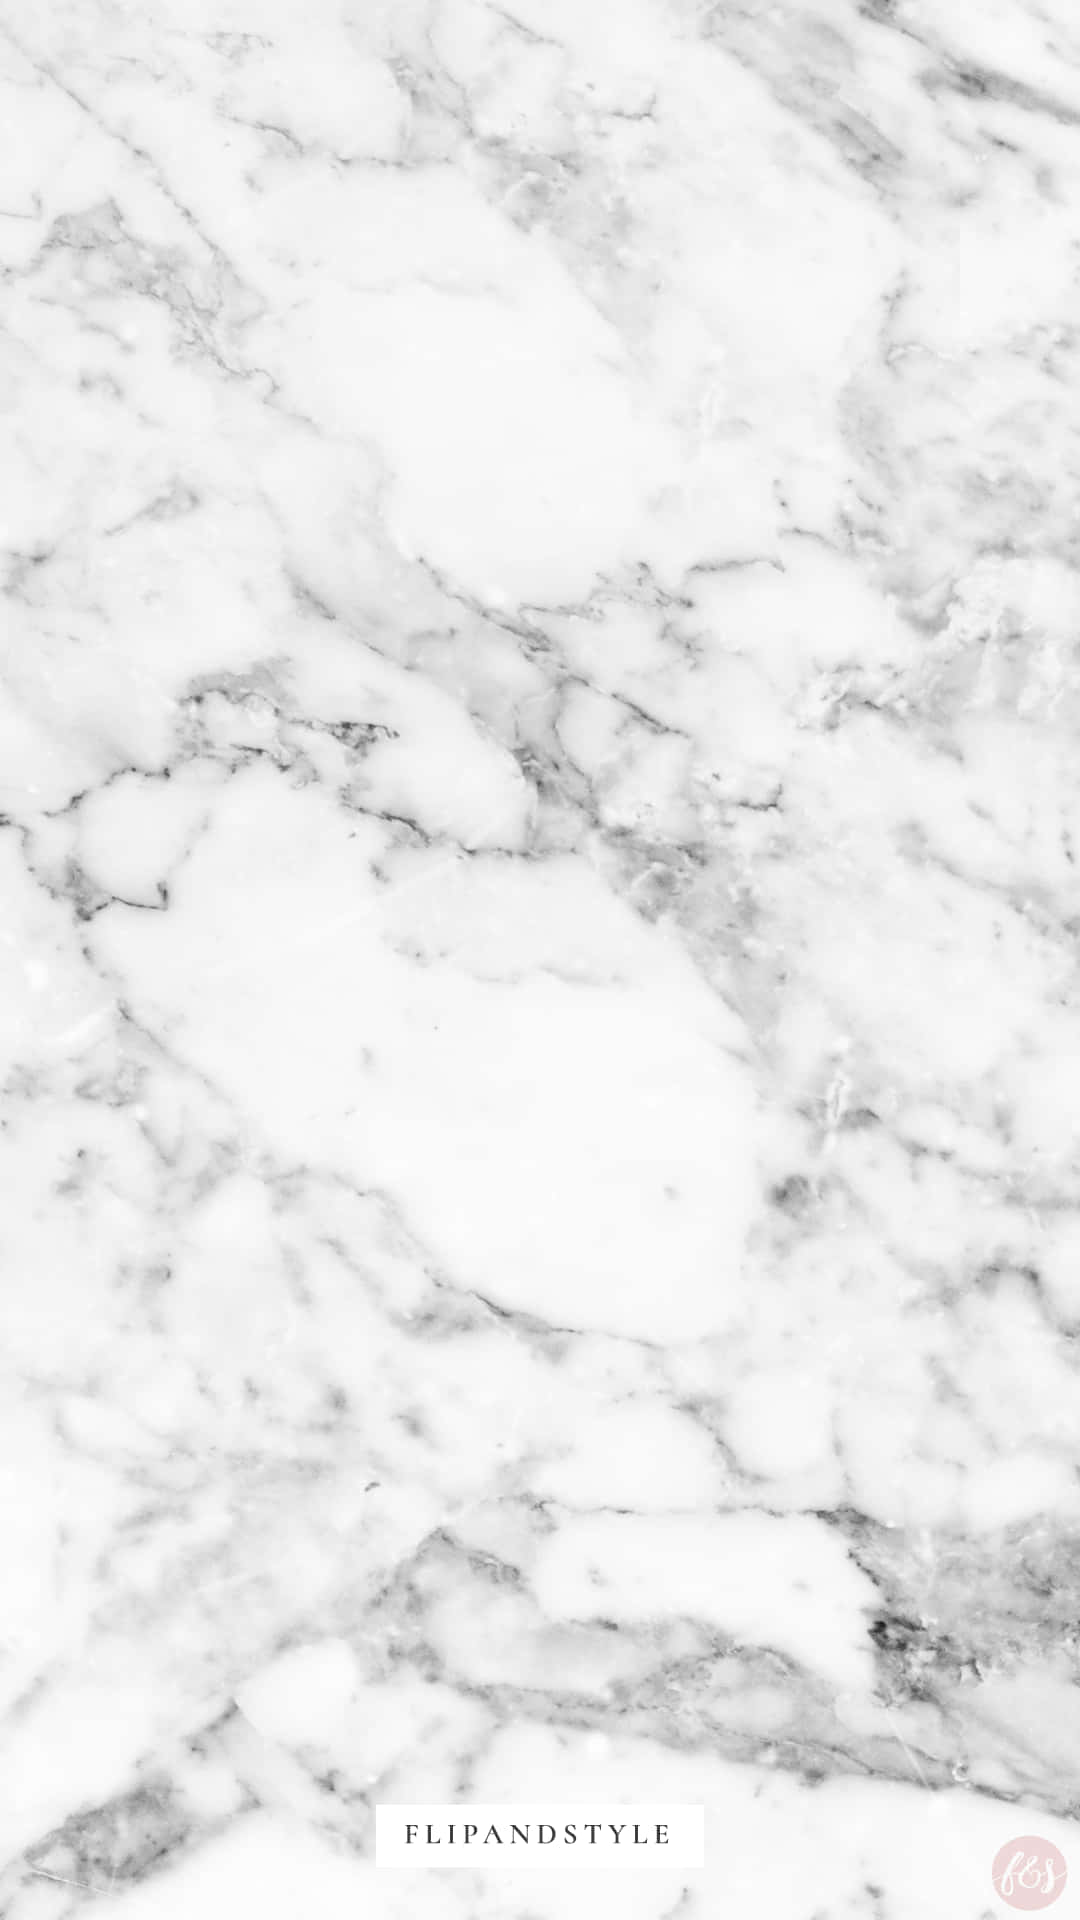 Aesthetic Gray Marble Close-up Phone Wallpaper